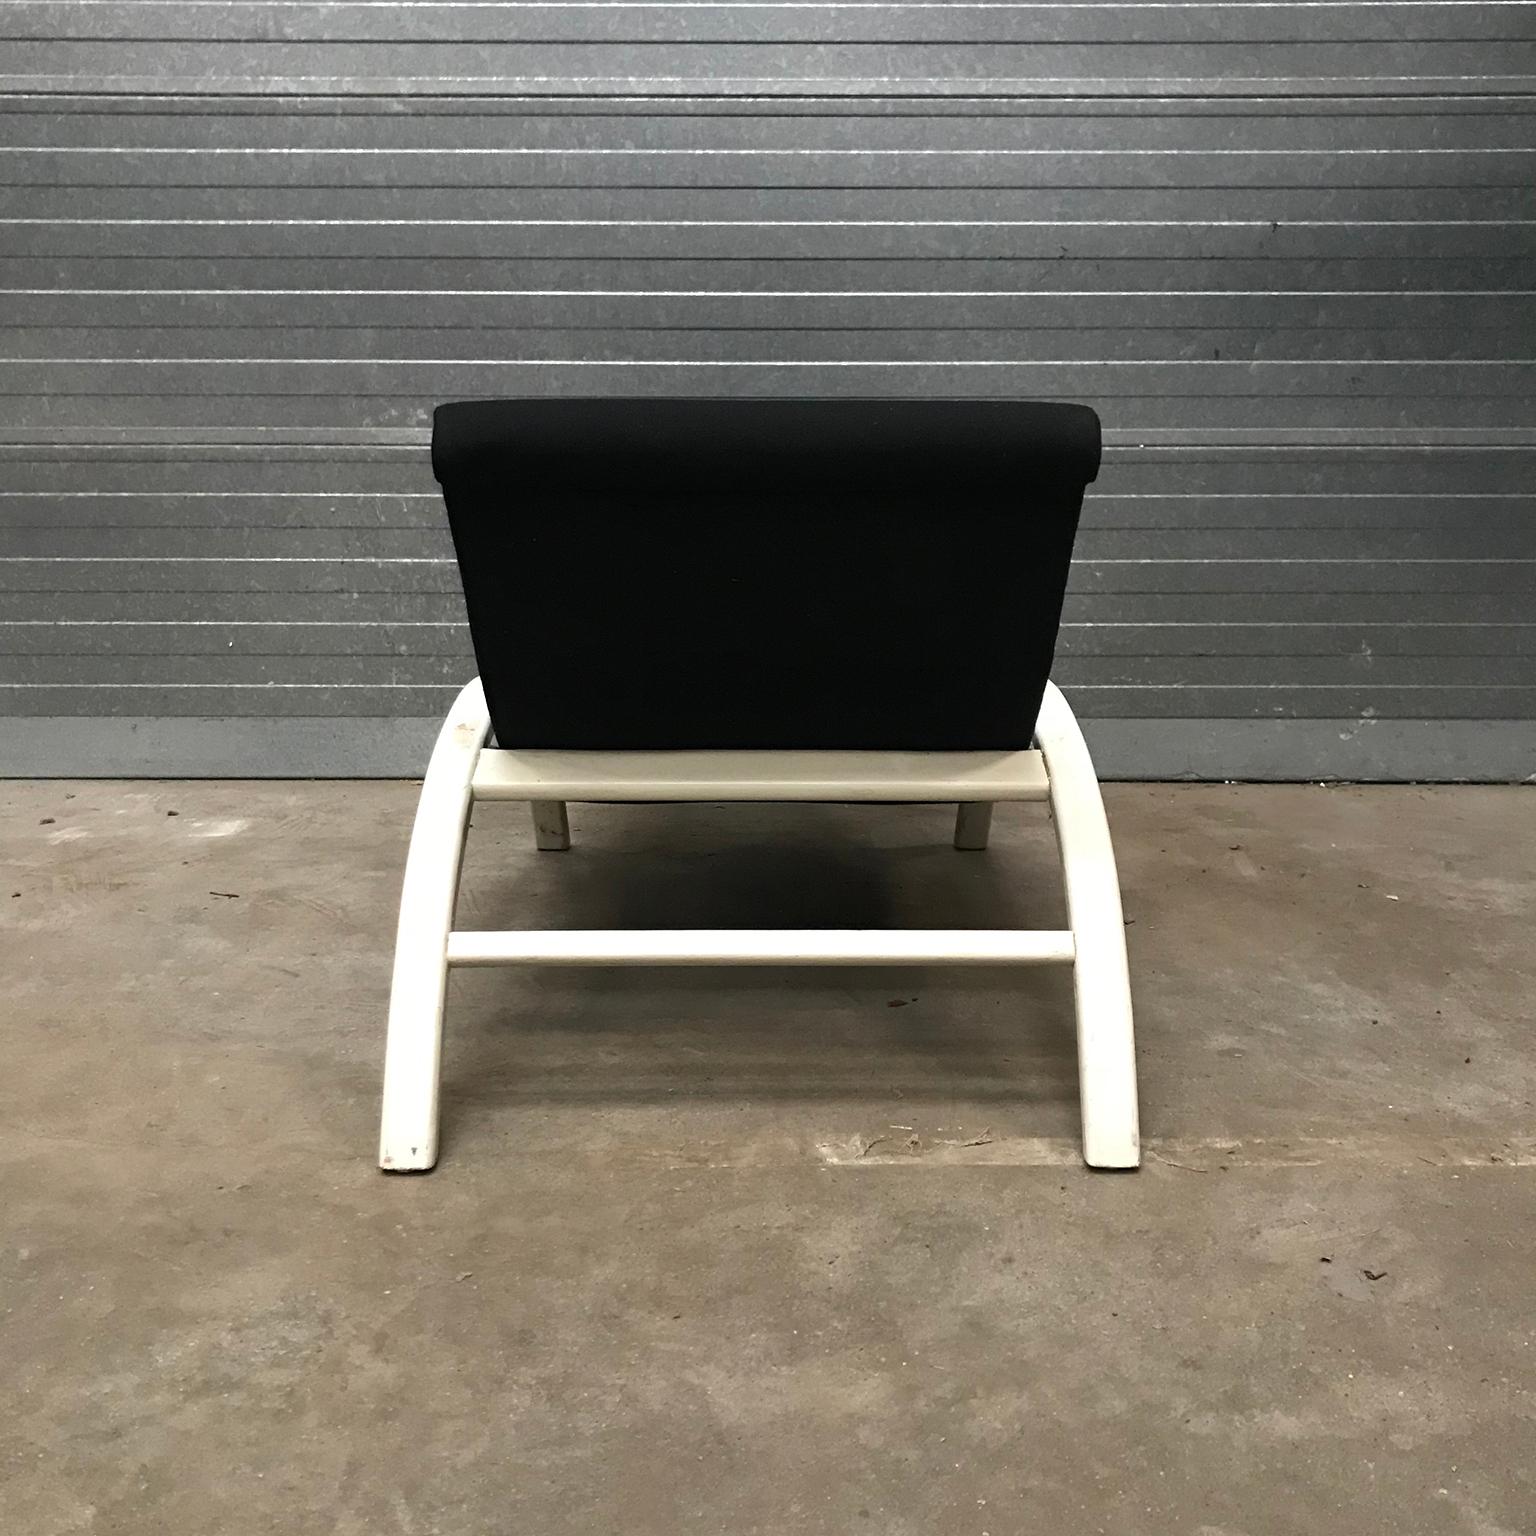 Elegant Infinitely Adjustable Easy Chair in Black Fabric & White Wood circa 1960 For Sale 2